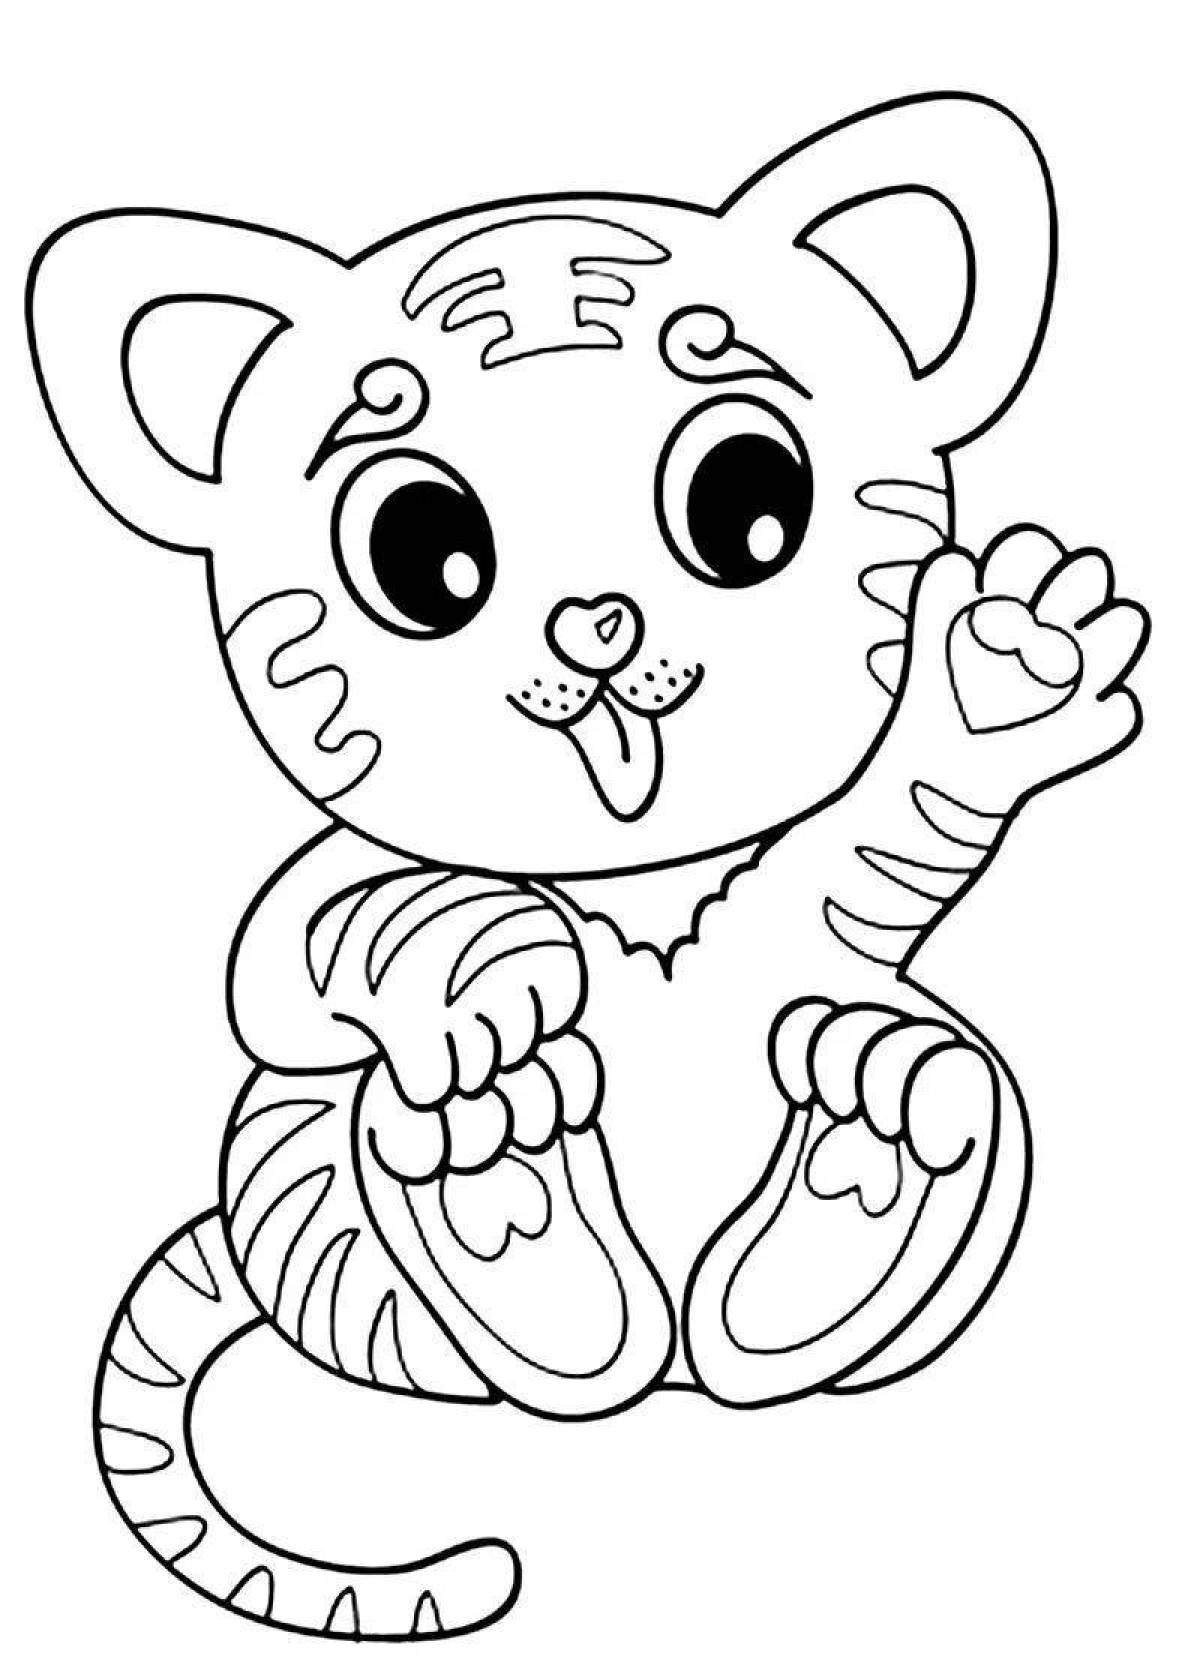 Coloring page graceful tiger cub